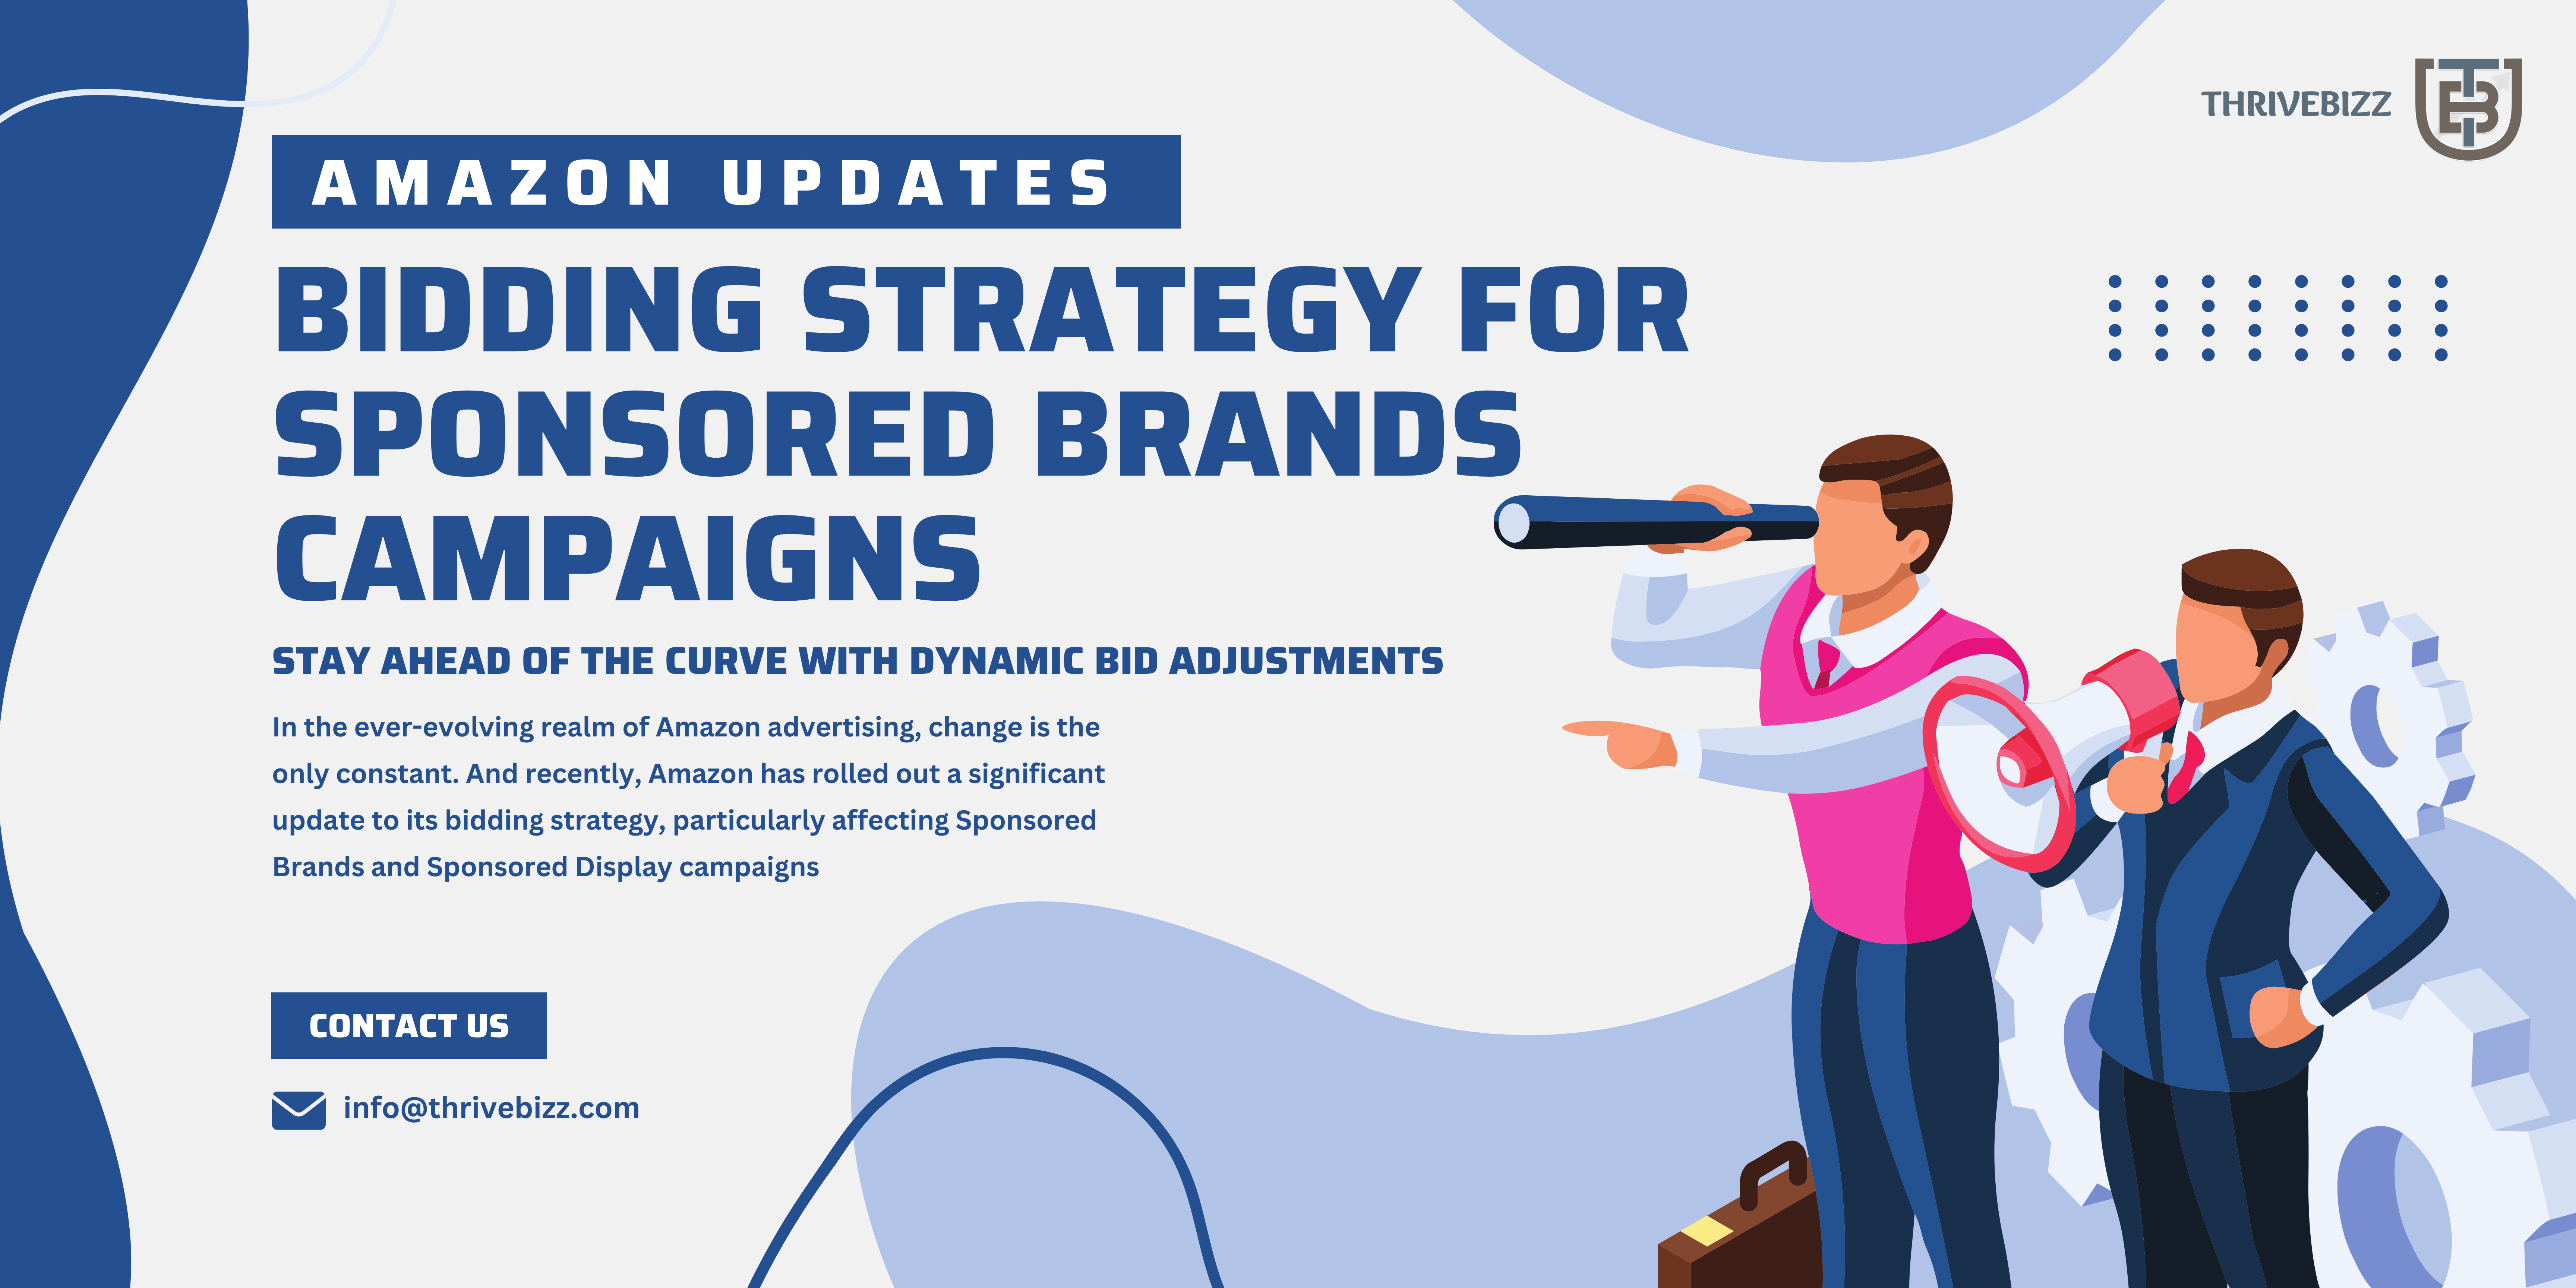 Amazon Updates Bidding Strategy for Sponsored Brands Campaigns 